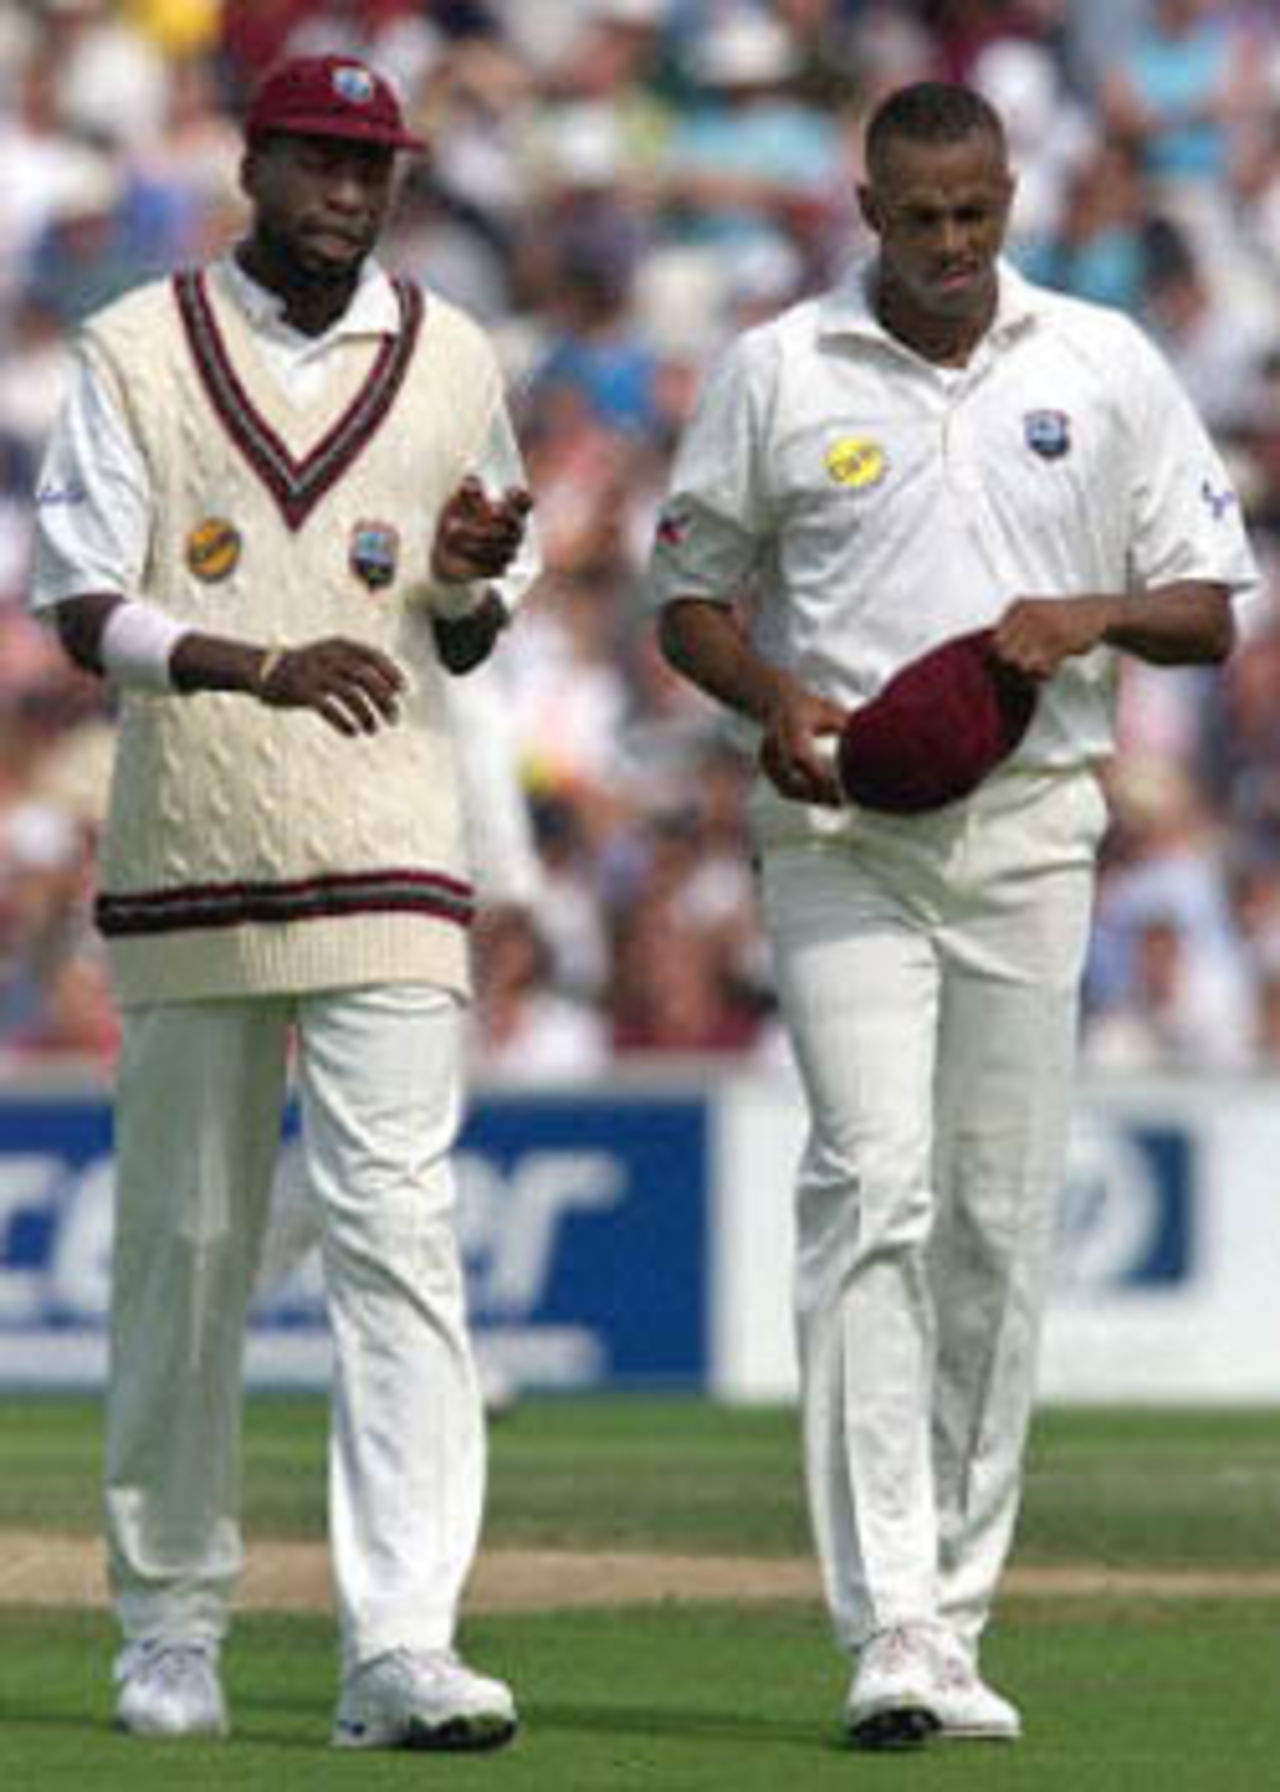 Curtly Ambrose (L) and Courtney Walsh (R), of the West Indies, walk together during the first session of the Fifth Test against England at The Oval in London. Both bowlers have taken over 400 Test wickets each and Ambrose has said he will retire from international cricket after this match. The Wisden Trophy, 2000, 5th Test, England v West Indies, Kennington Oval, London, 31Aug-04Sep 2000 (Day 1)